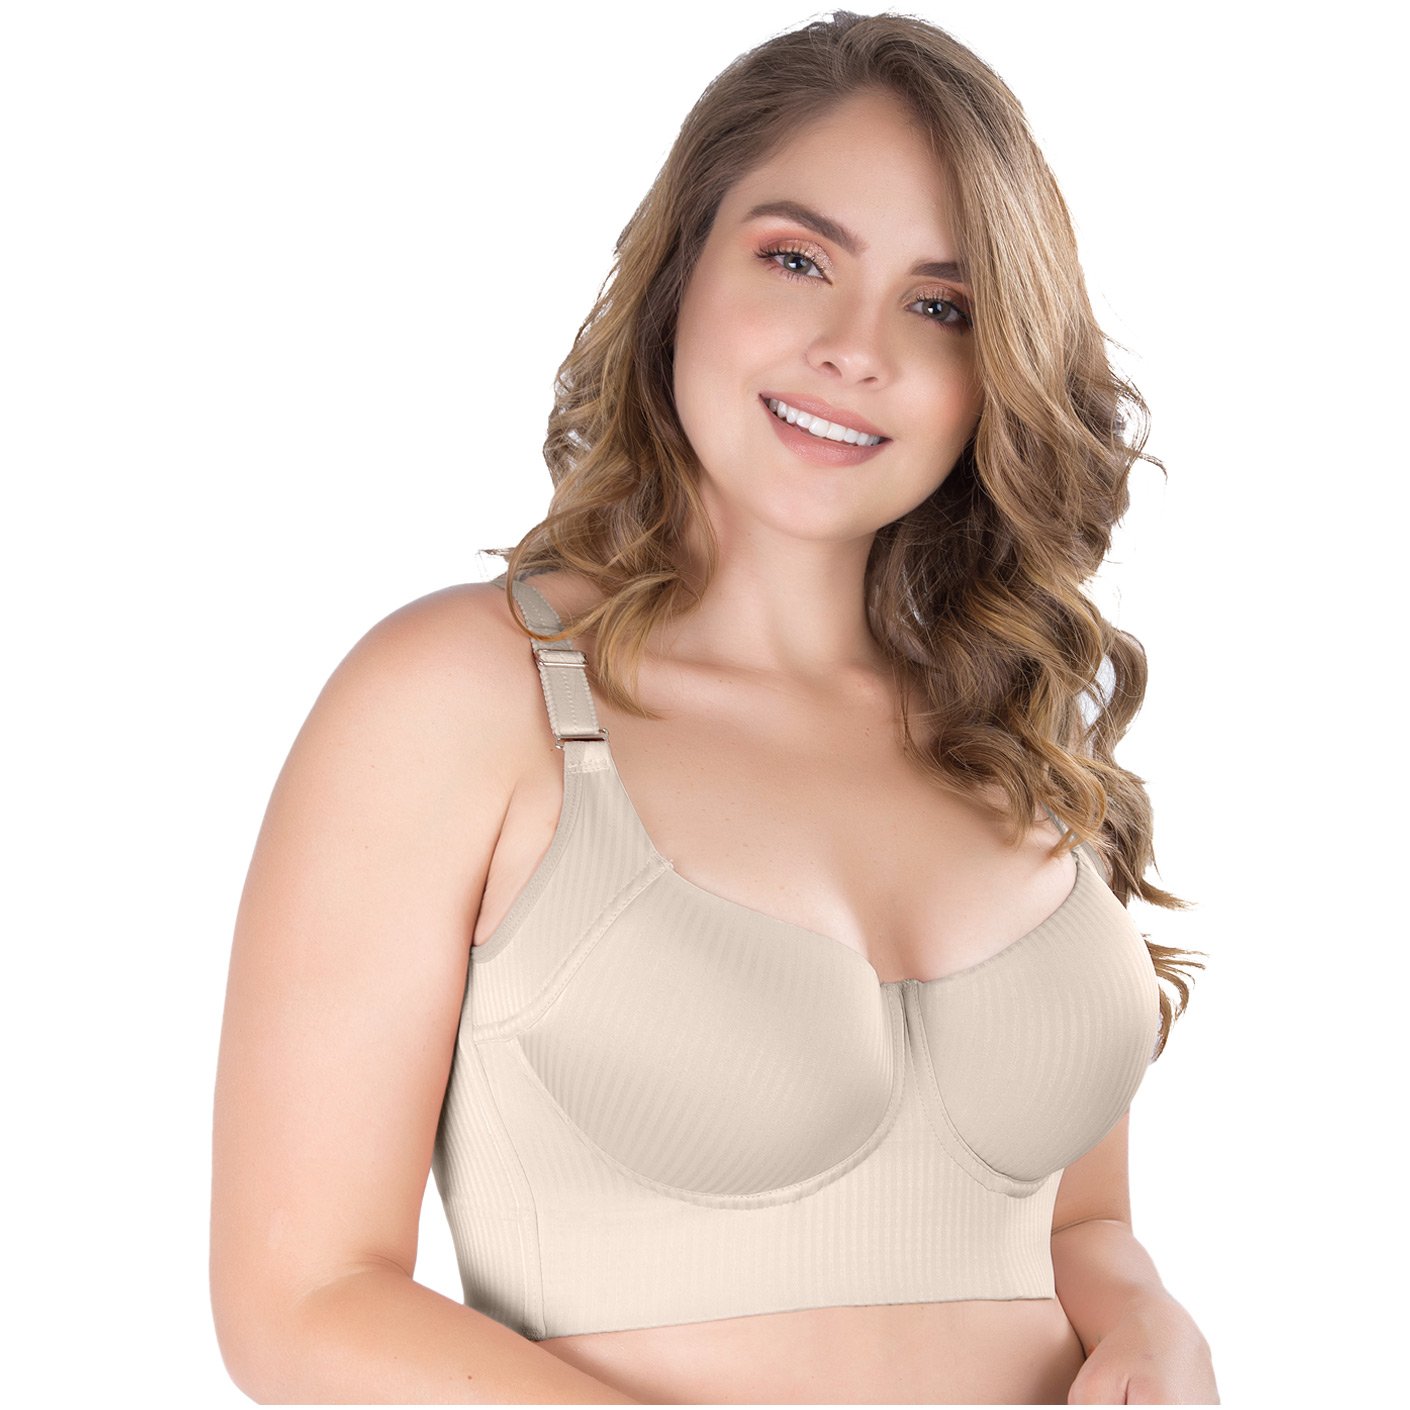 UPLADY 8542 / EXTRA FIRM CONTROL FULL CUP BRA WITH SIDE SUPPORT